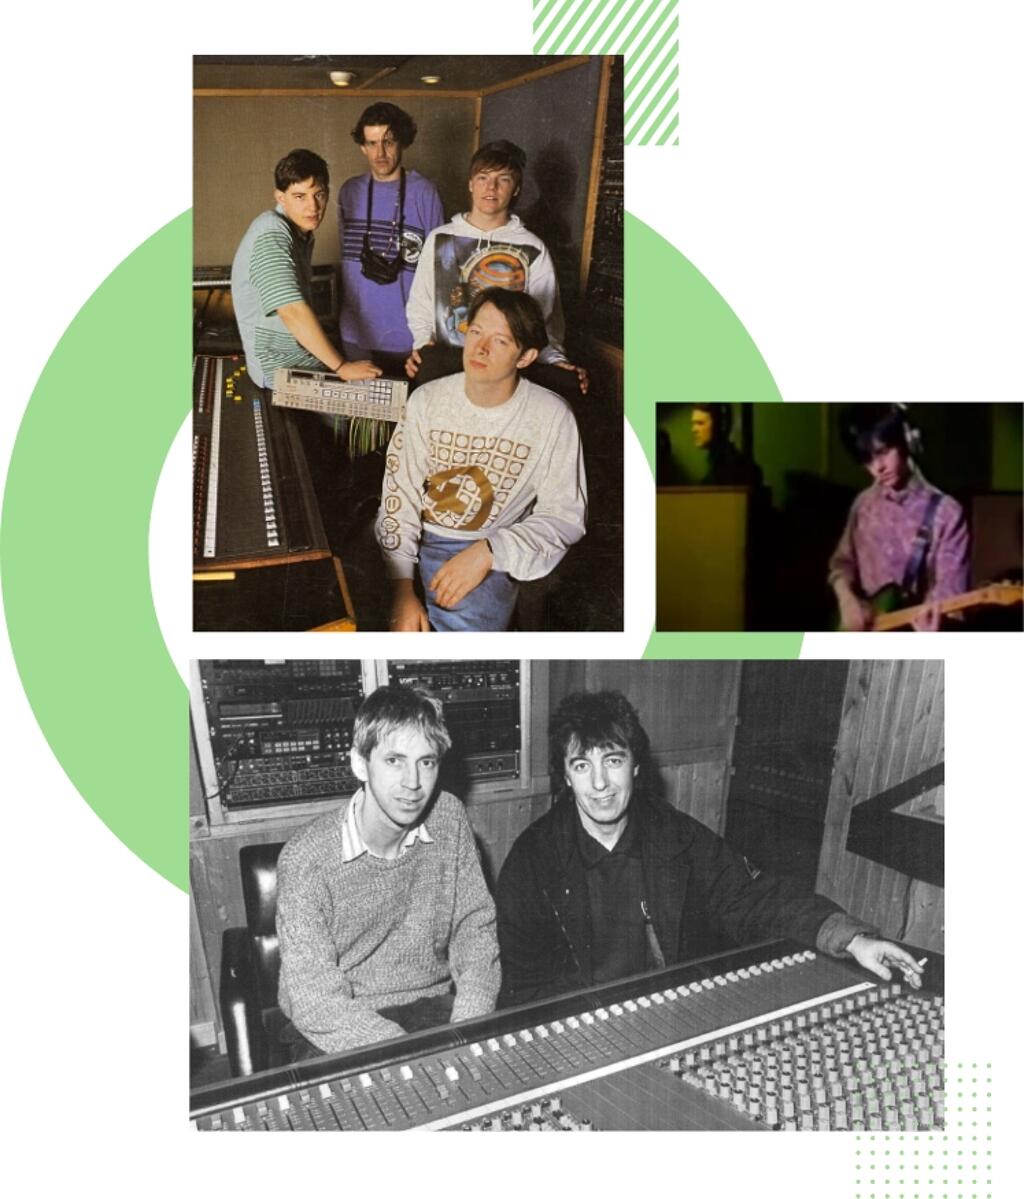 Manchester music history 1: 808 State, The Smiths, John Breakell and Bill Wyman